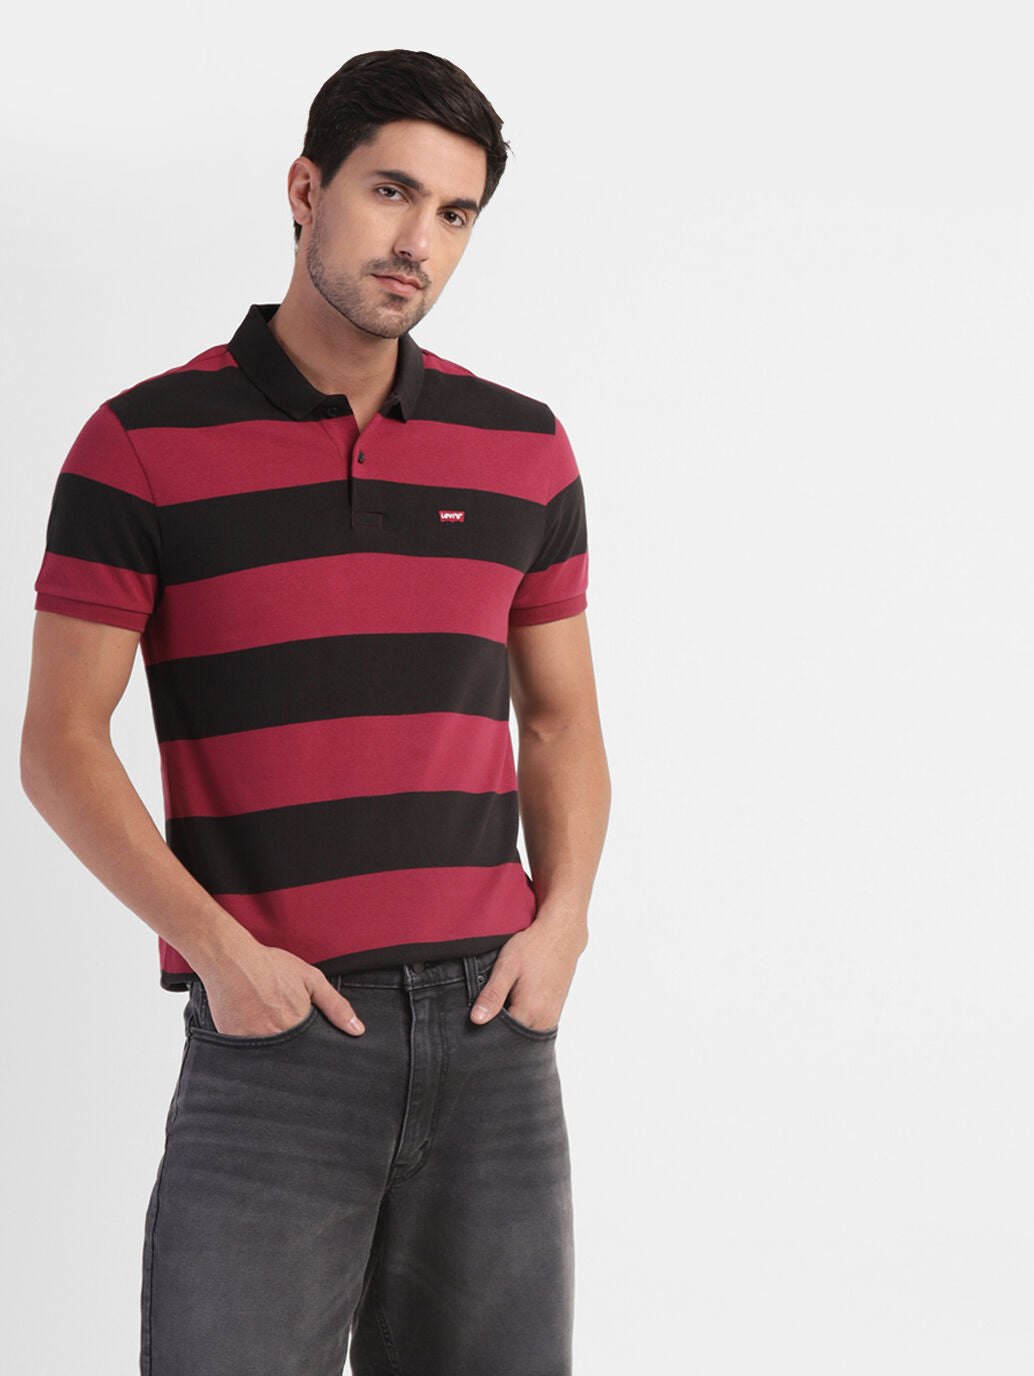 LEVIS RUMBA RUGBY 17474-0312 POLO T-SHIRT (M)